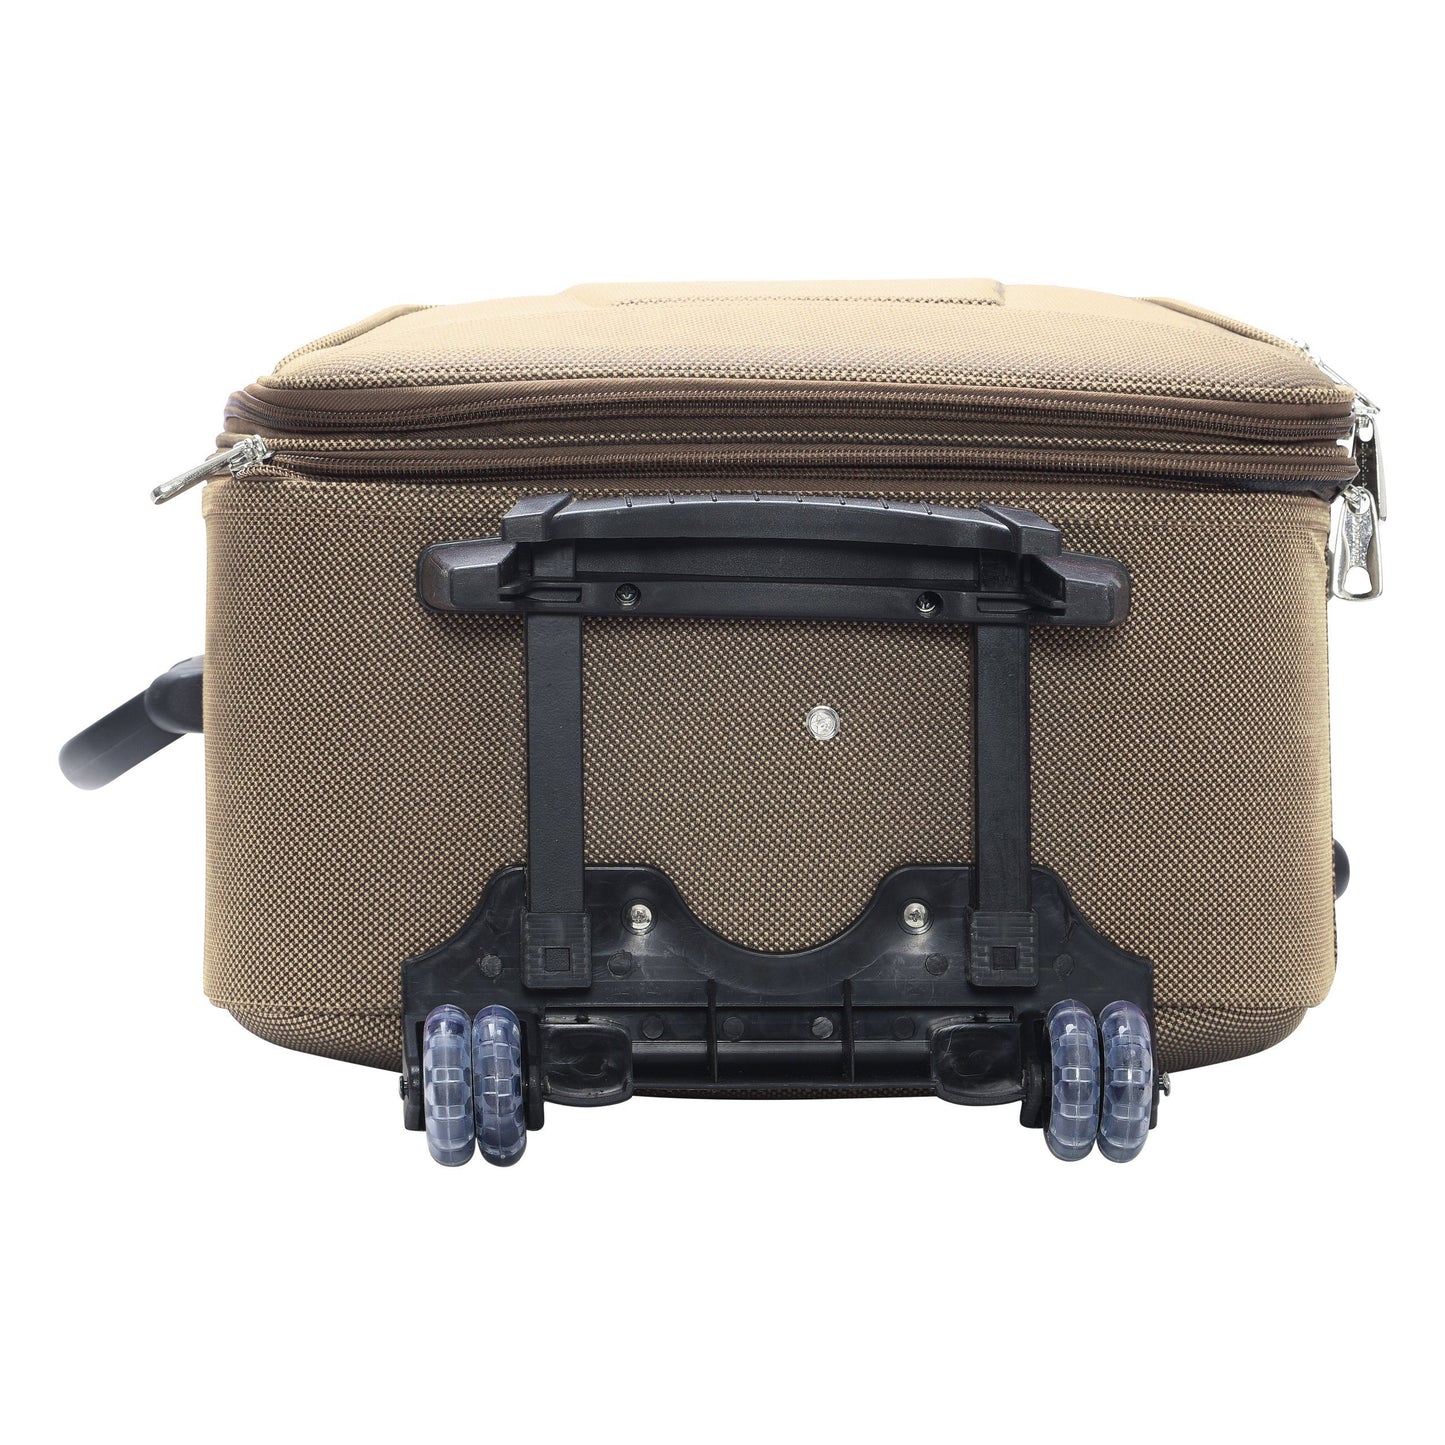 Dhariwal Extendable Rolling Trolley Suitcase 24" 80L SC-804 Suitcases Dhariwal 